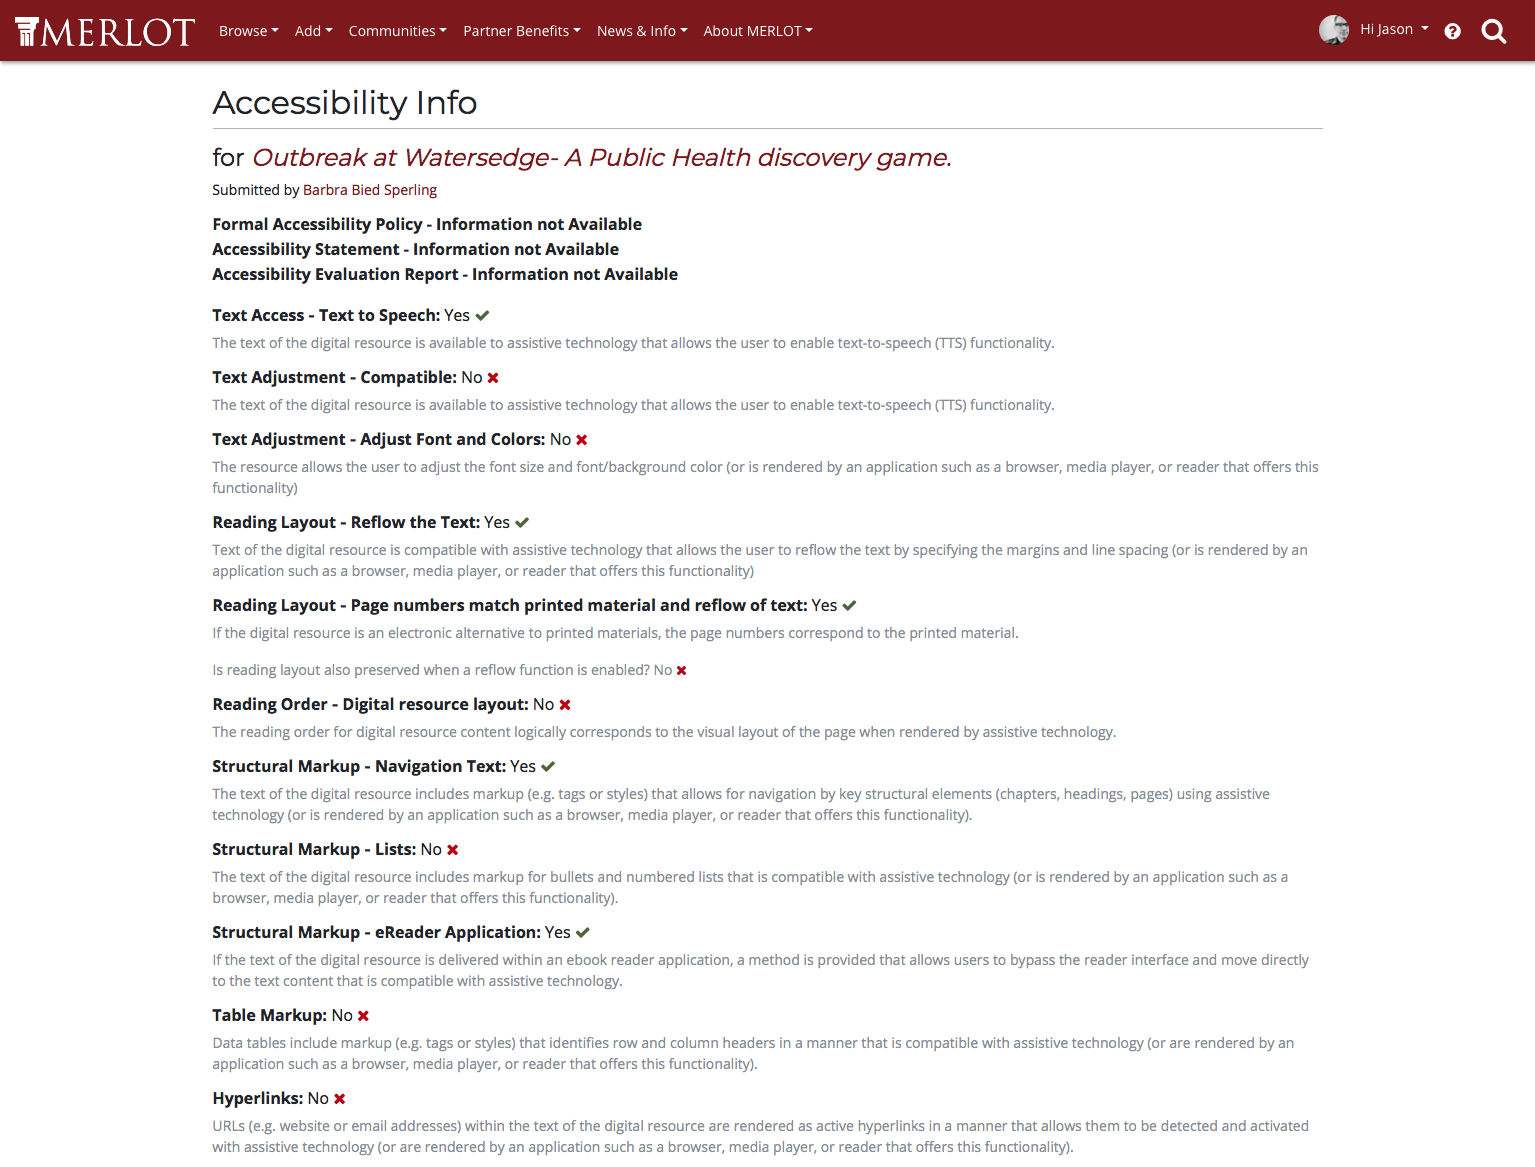 Accessibility Info page